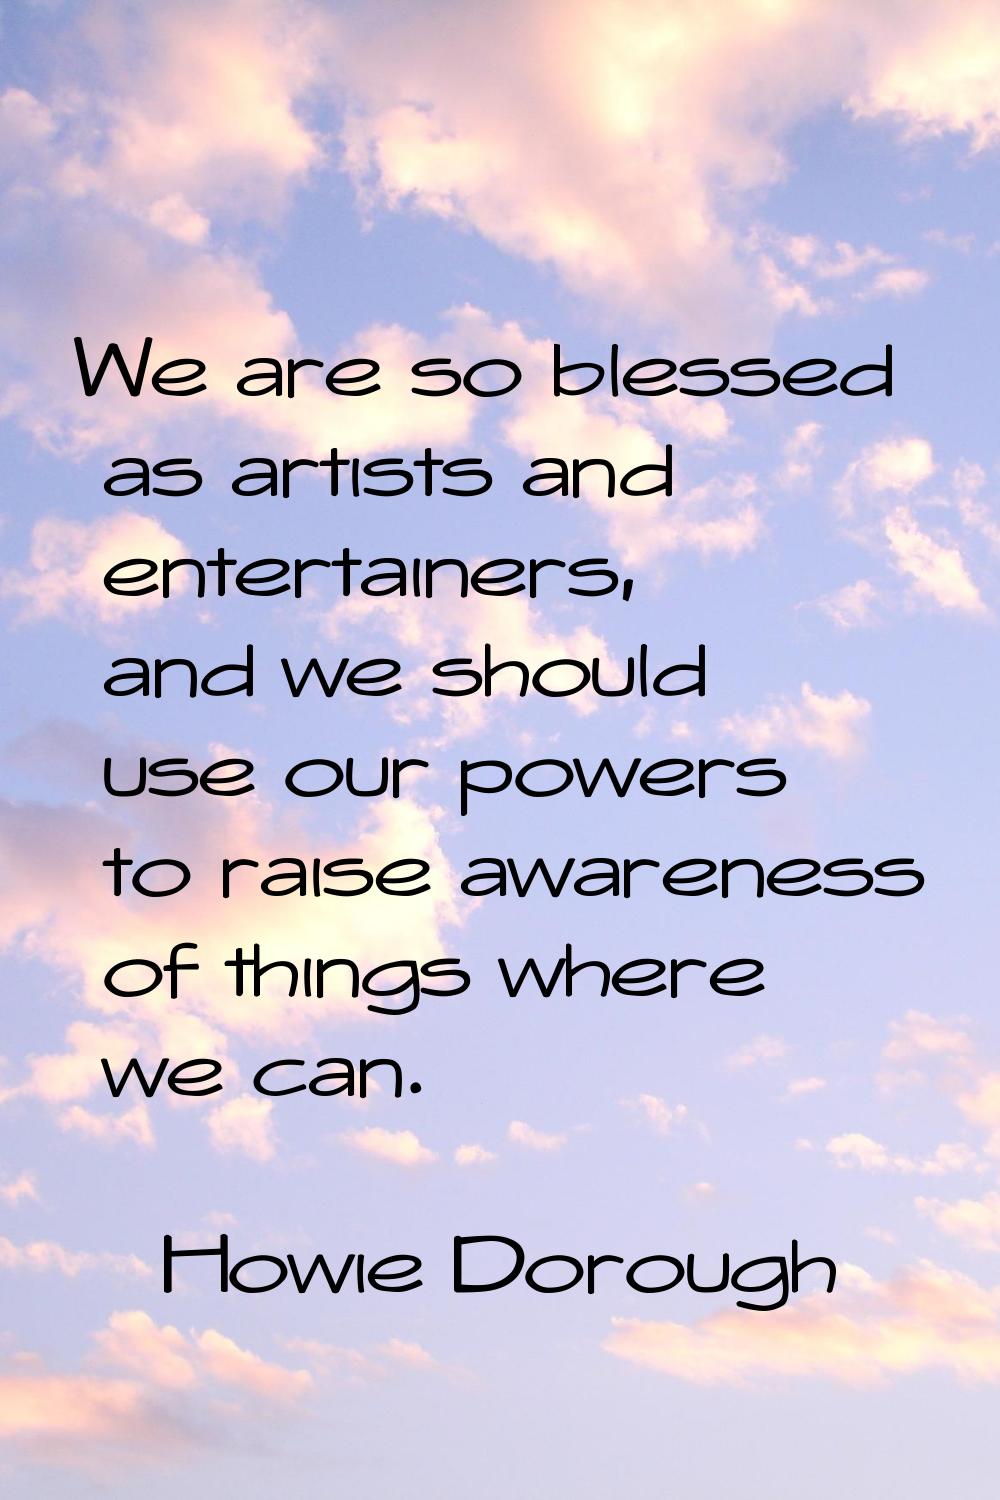 We are so blessed as artists and entertainers, and we should use our powers to raise awareness of t